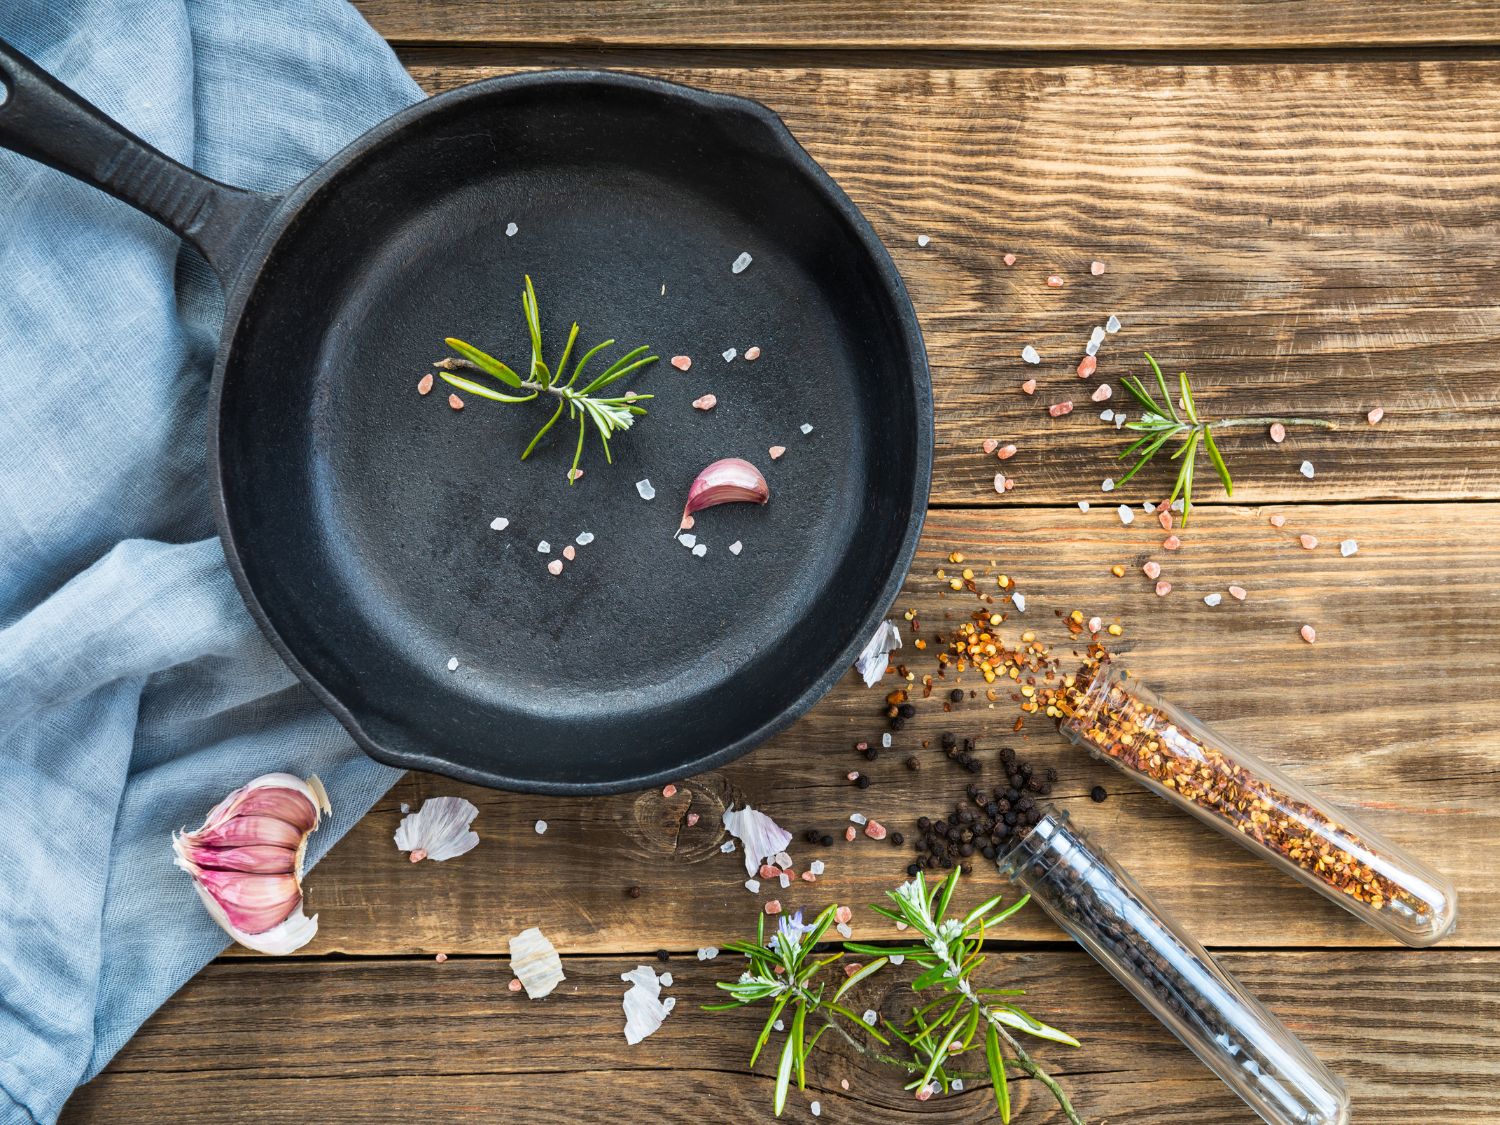 A cast iron skillet is sitting on a wooden background with a blue towel and some herbs